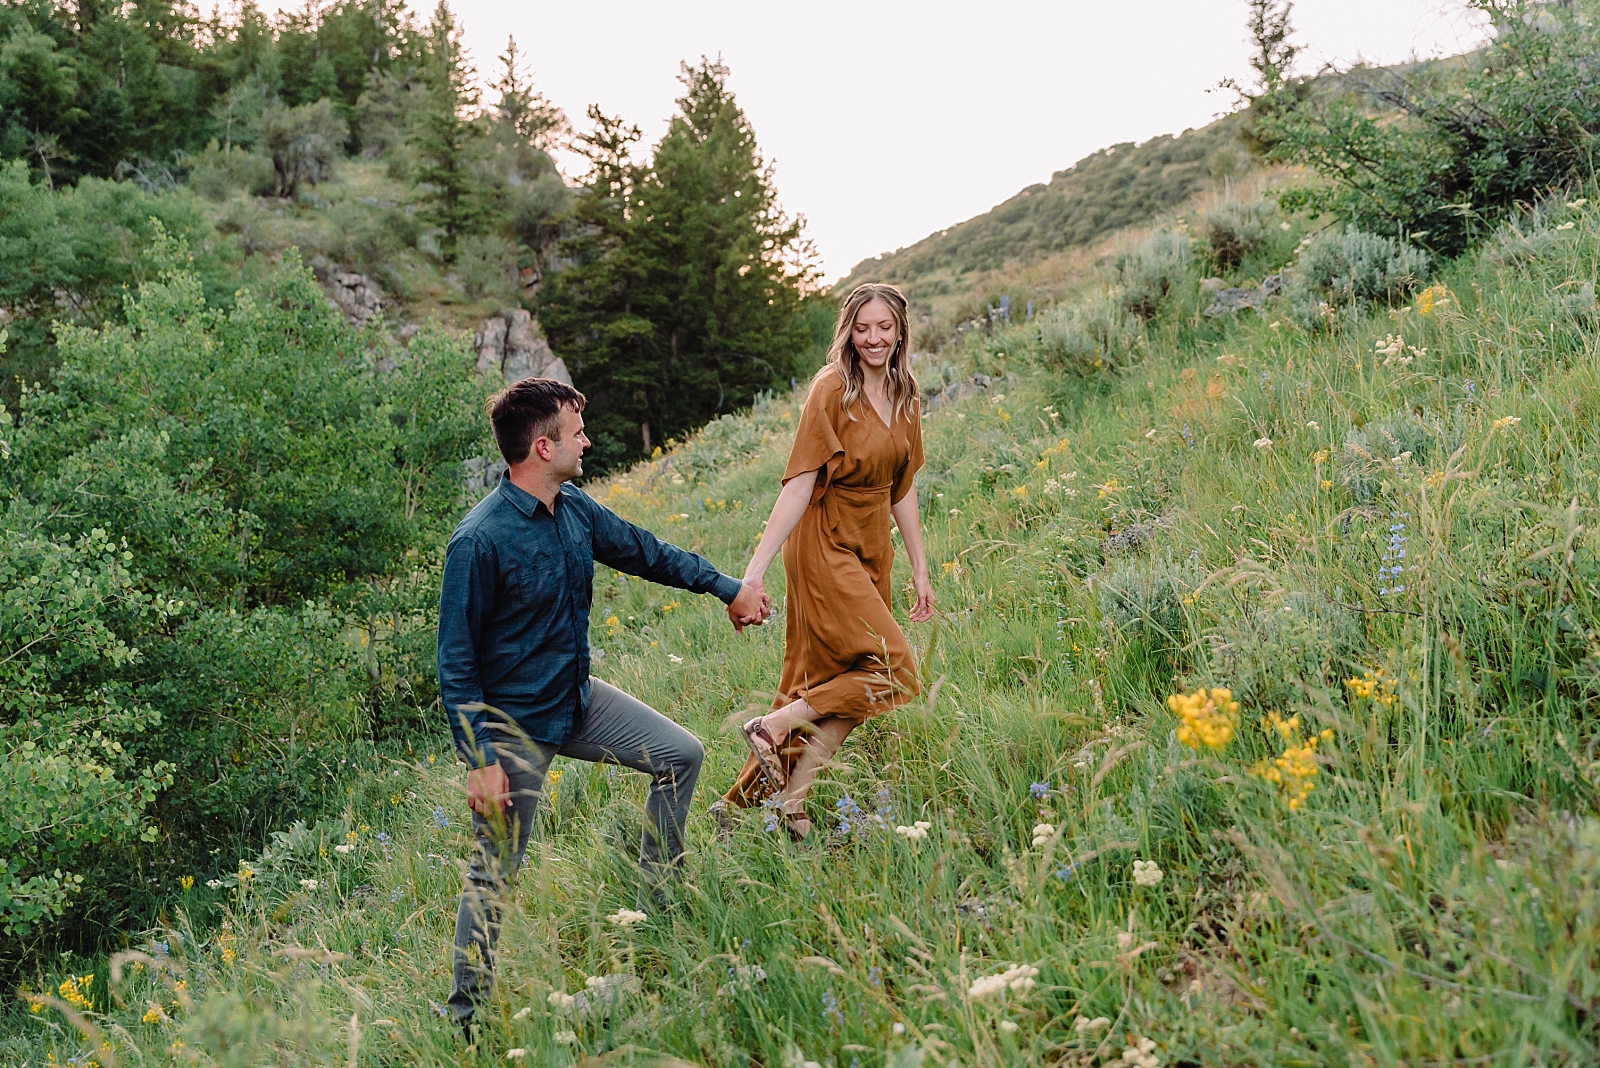 engaged couple walking up a hill while woman is wearing rust colored long dress and man wears coordinating navy shirt